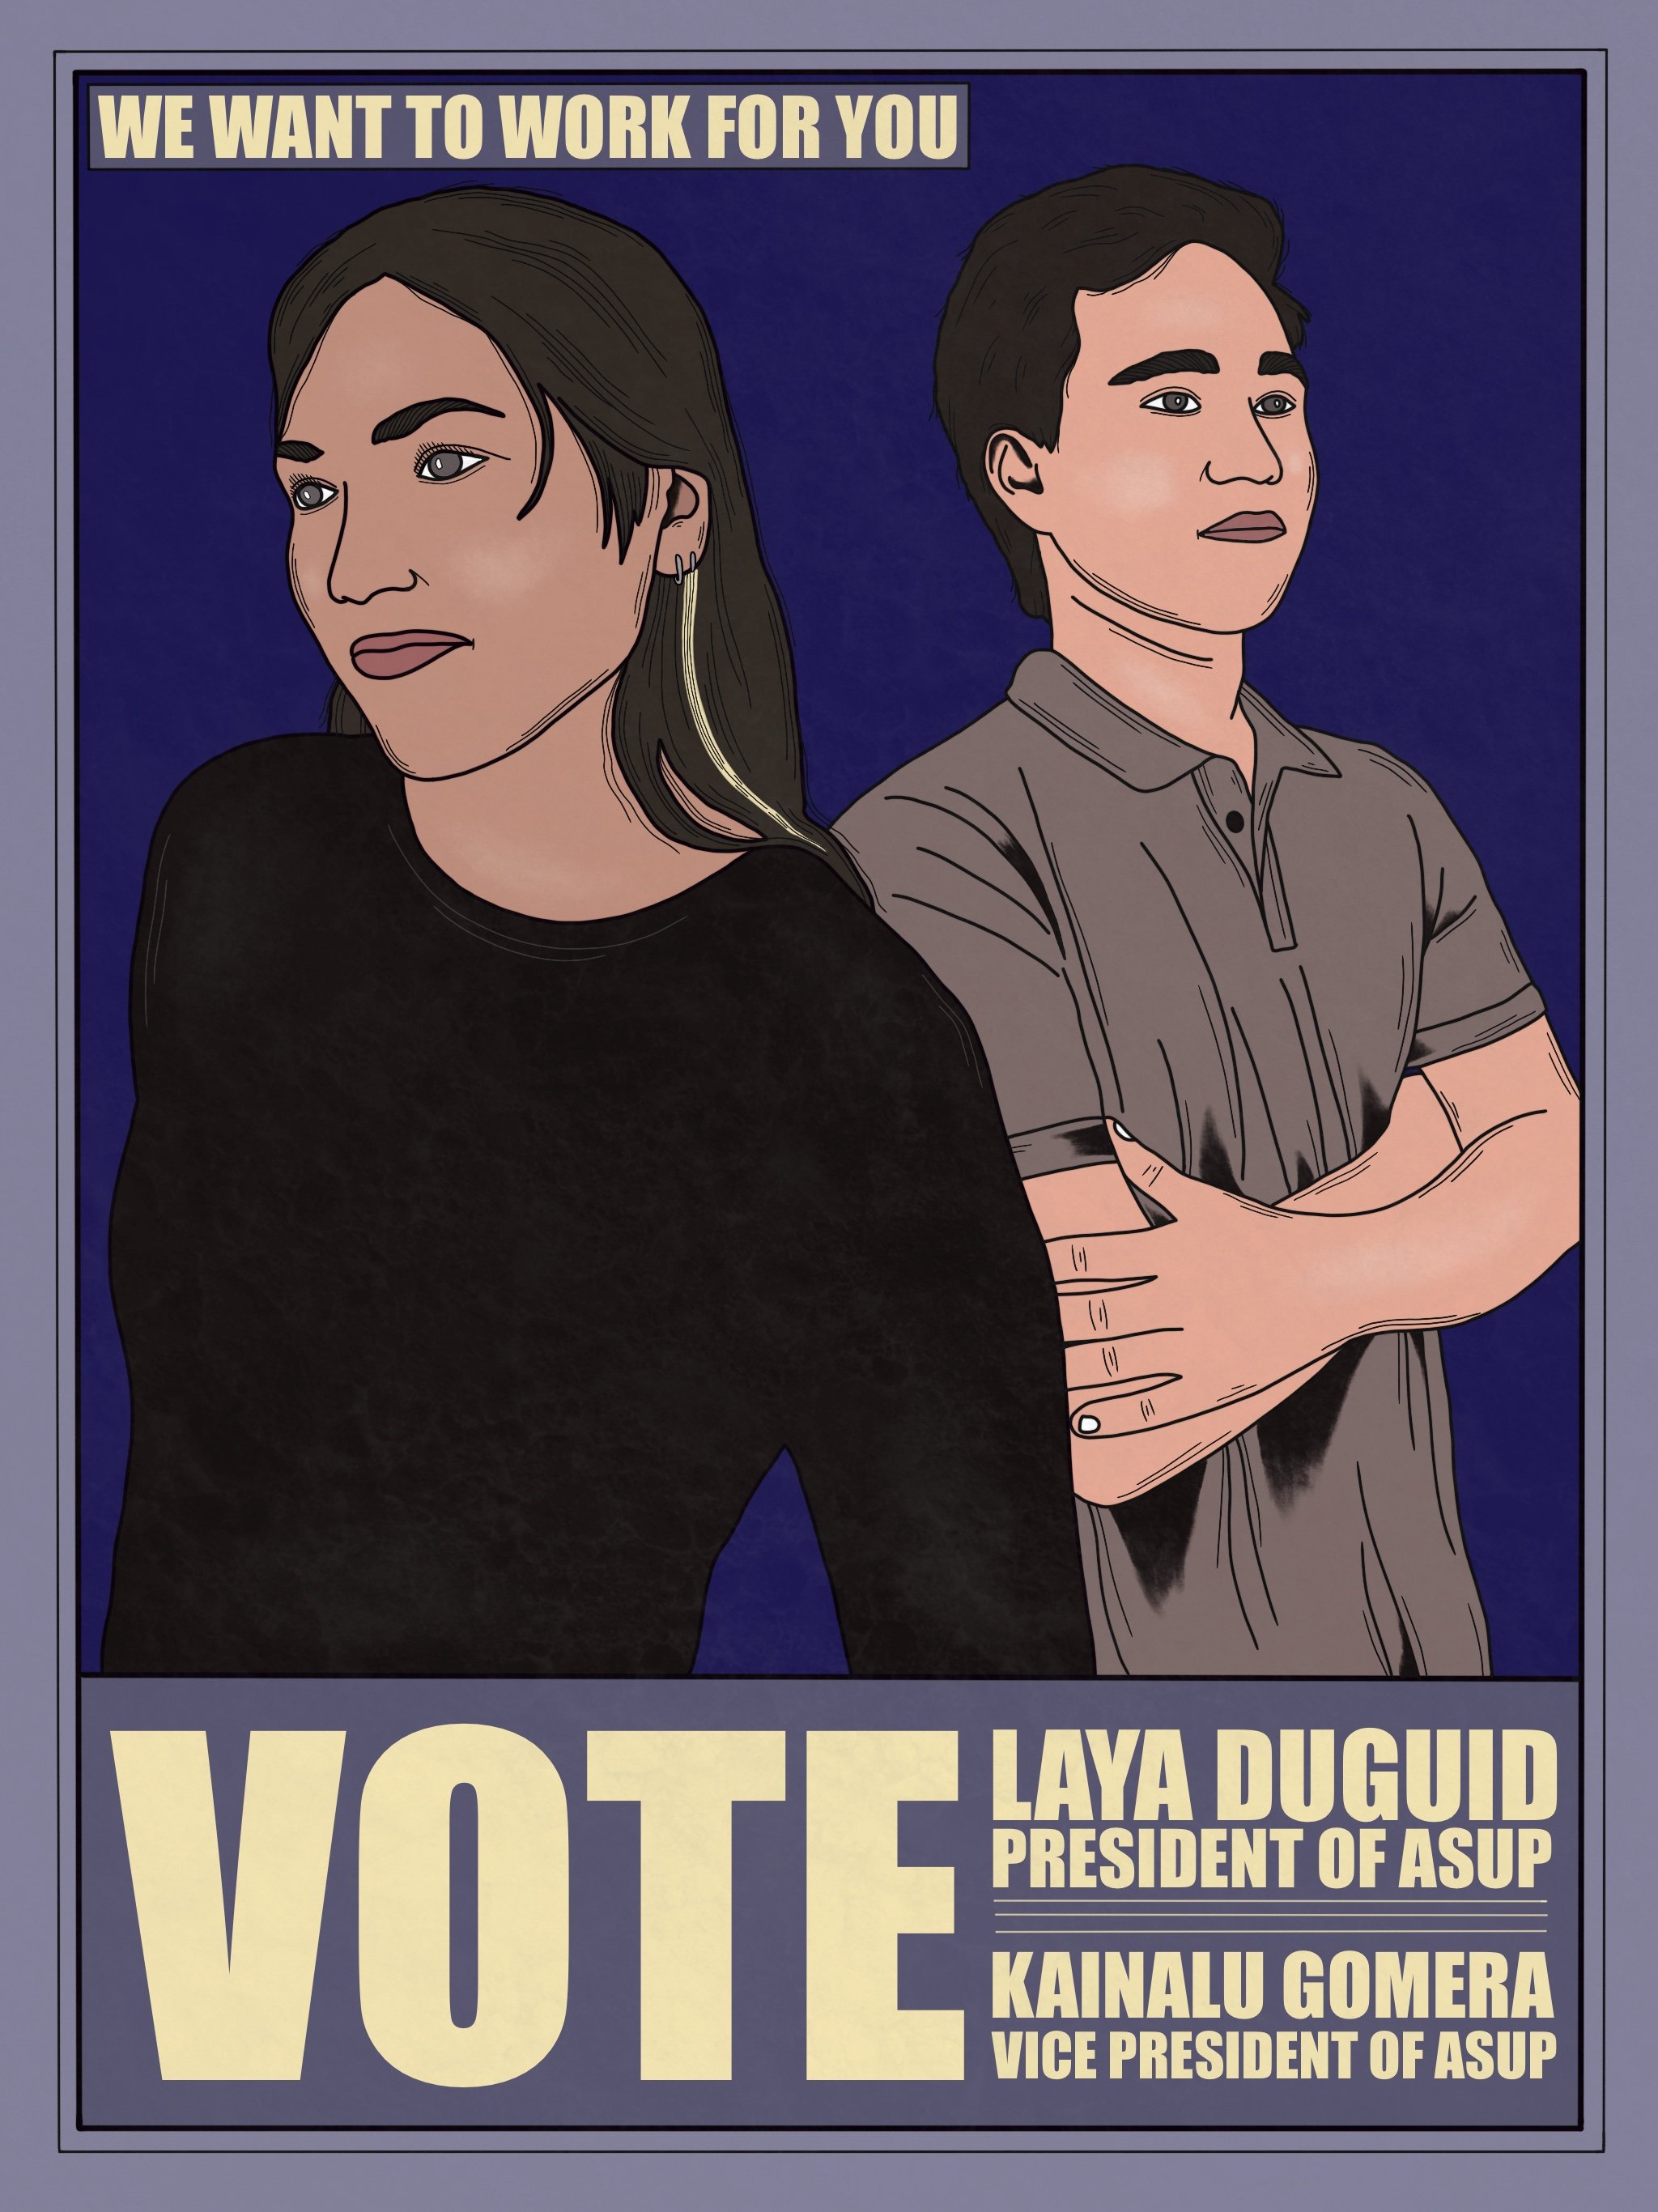 Campaign Poster Art 